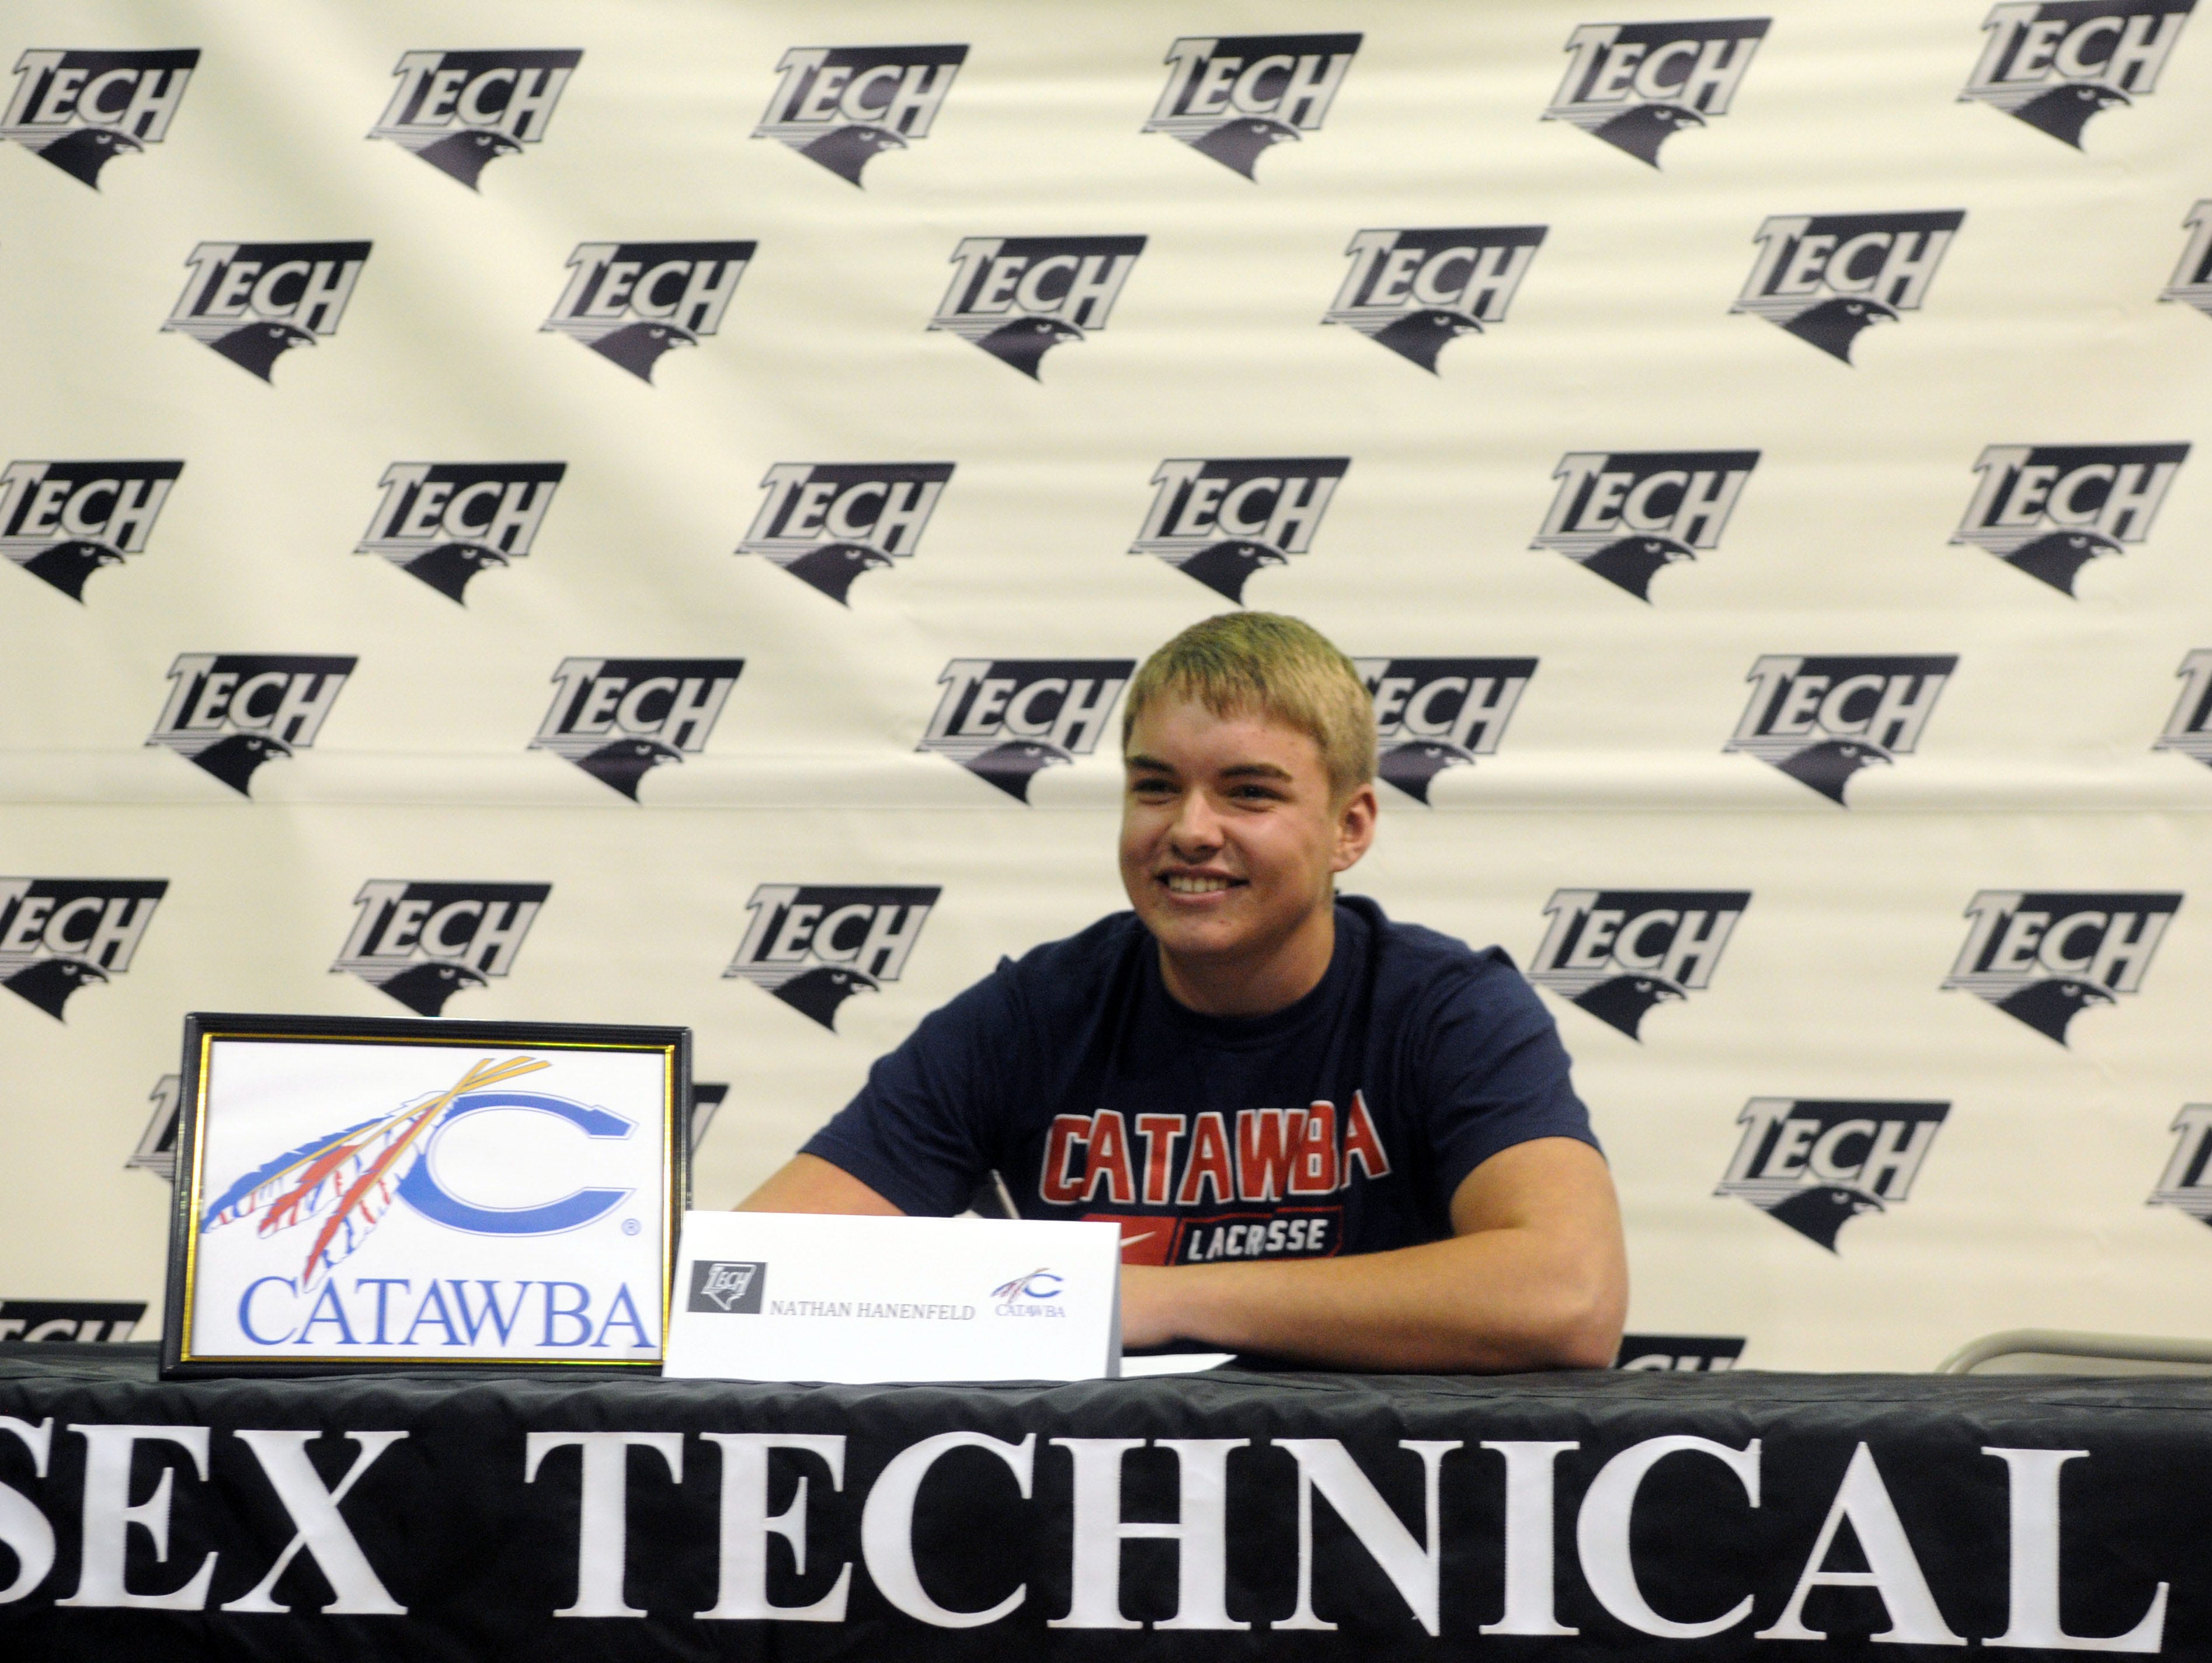 Sussex Tech’s Nathan Hanenfeld signs his national letter of intent to Catawba College in North Carolina.